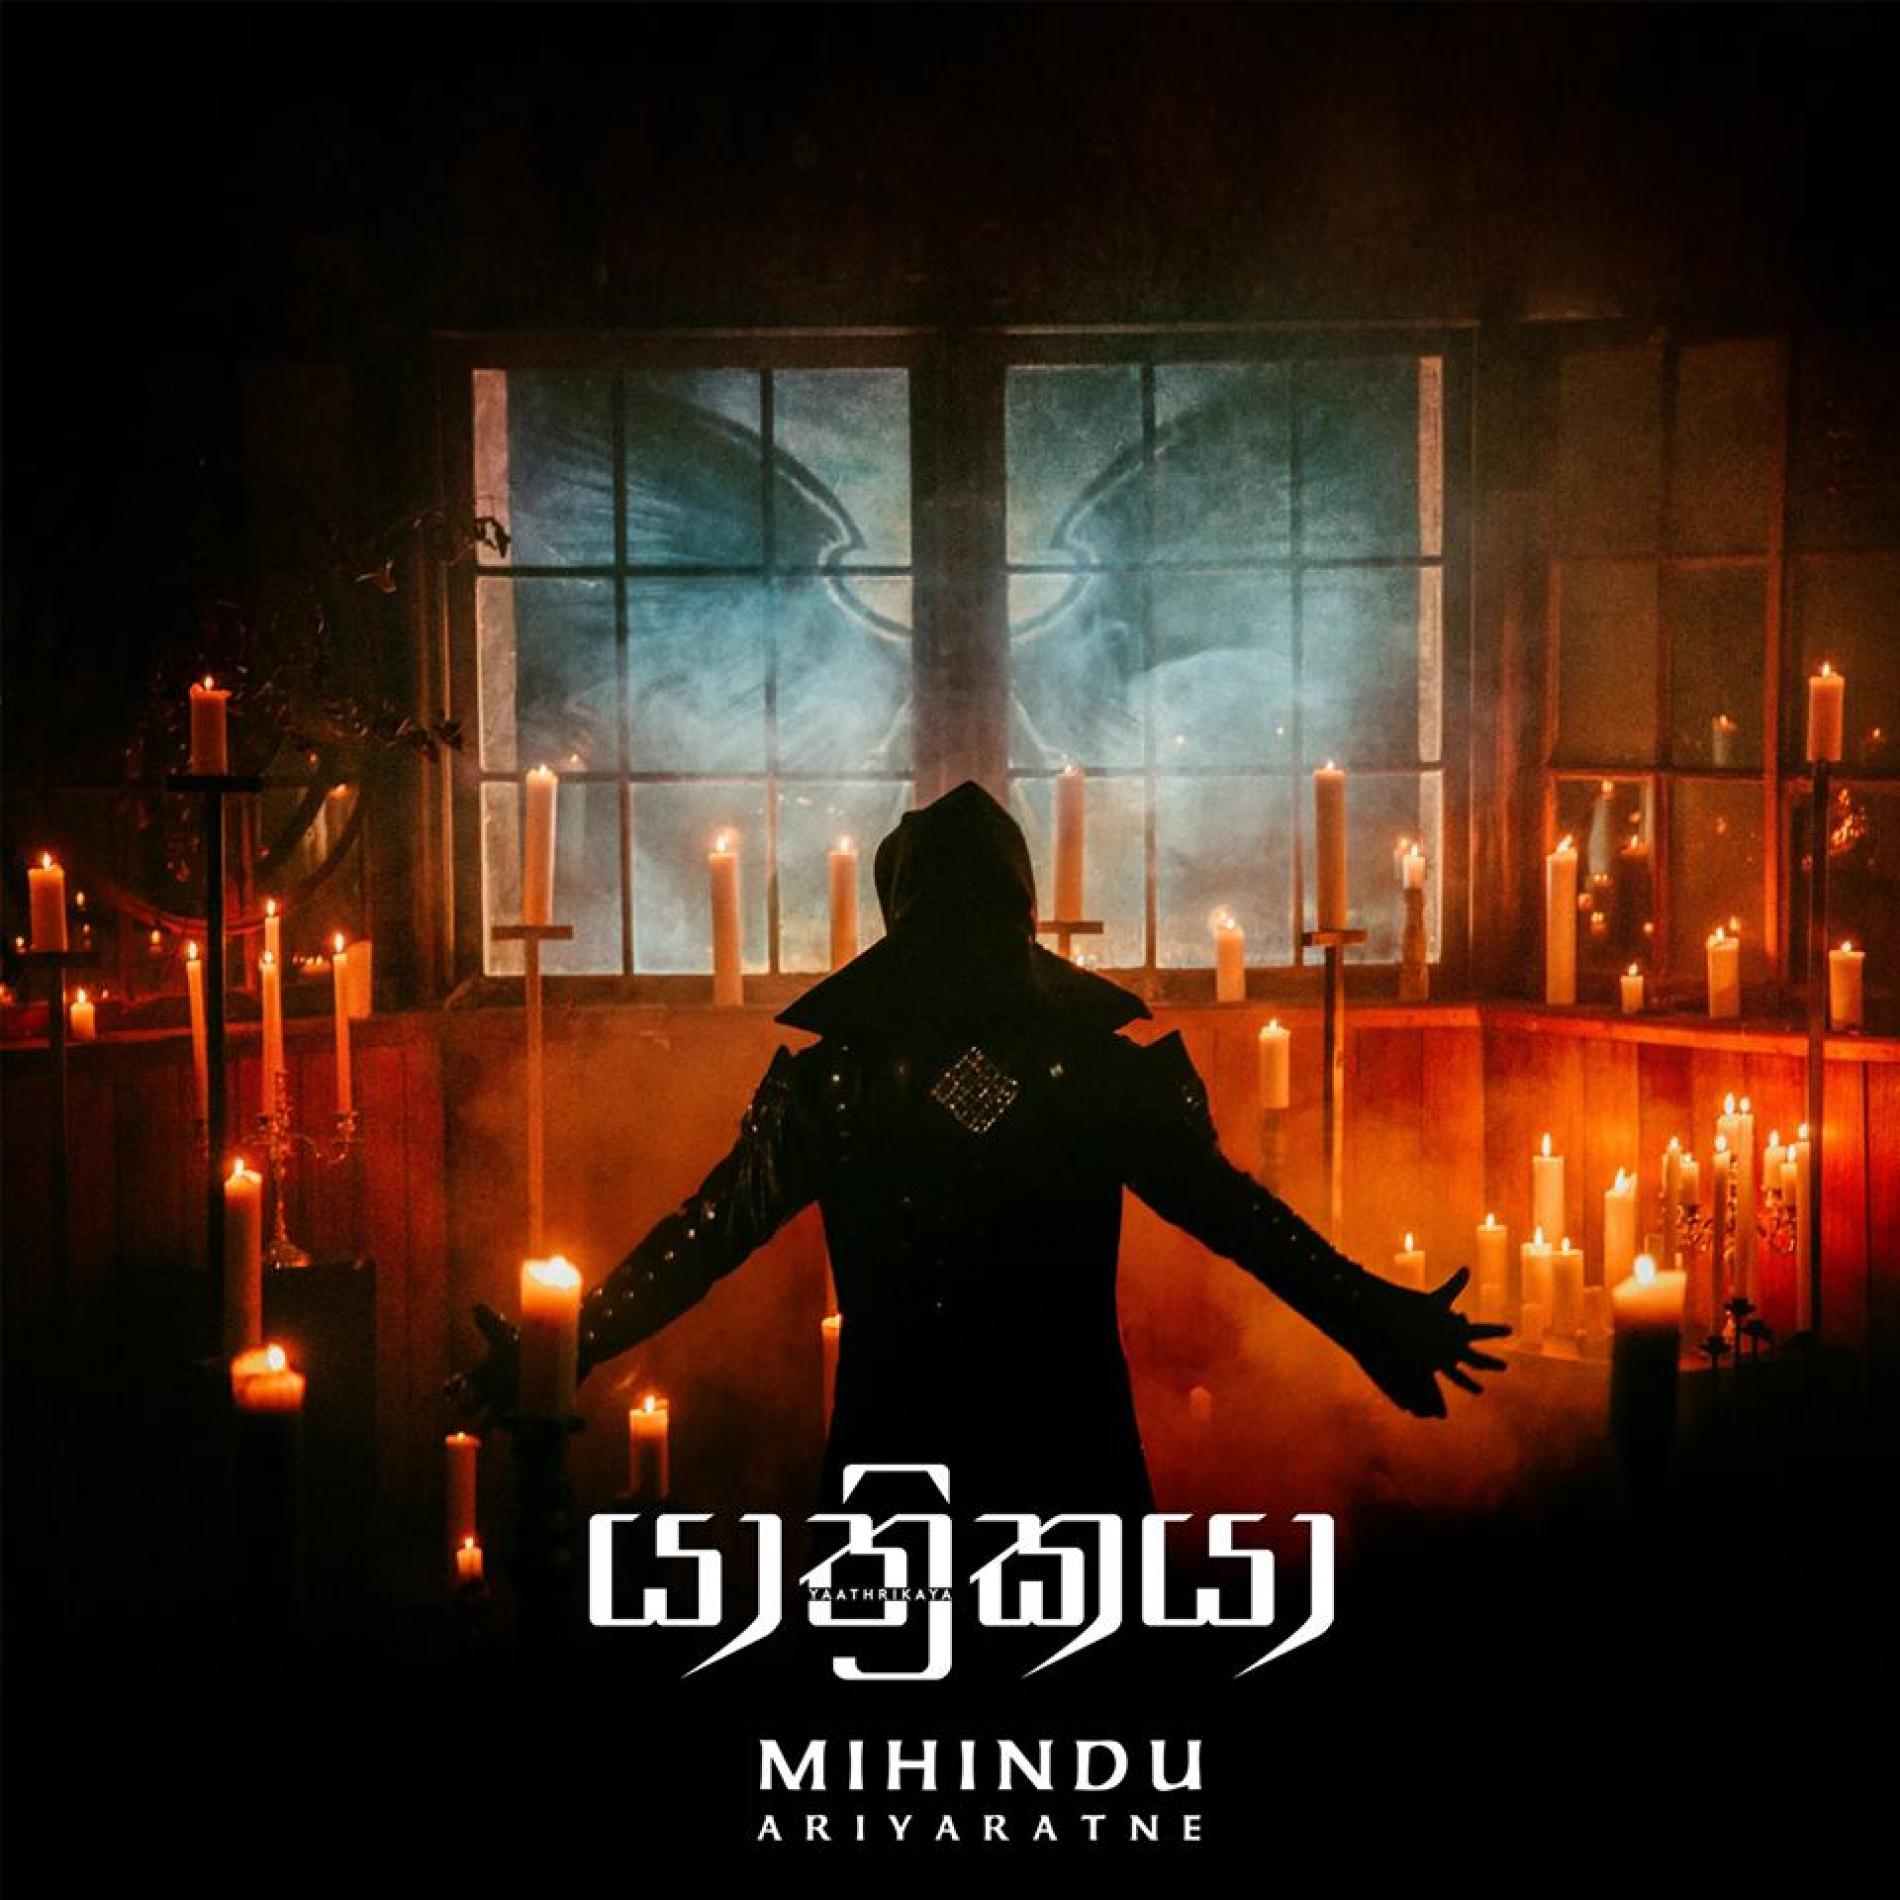 Mihindu To Release New Music Soon!